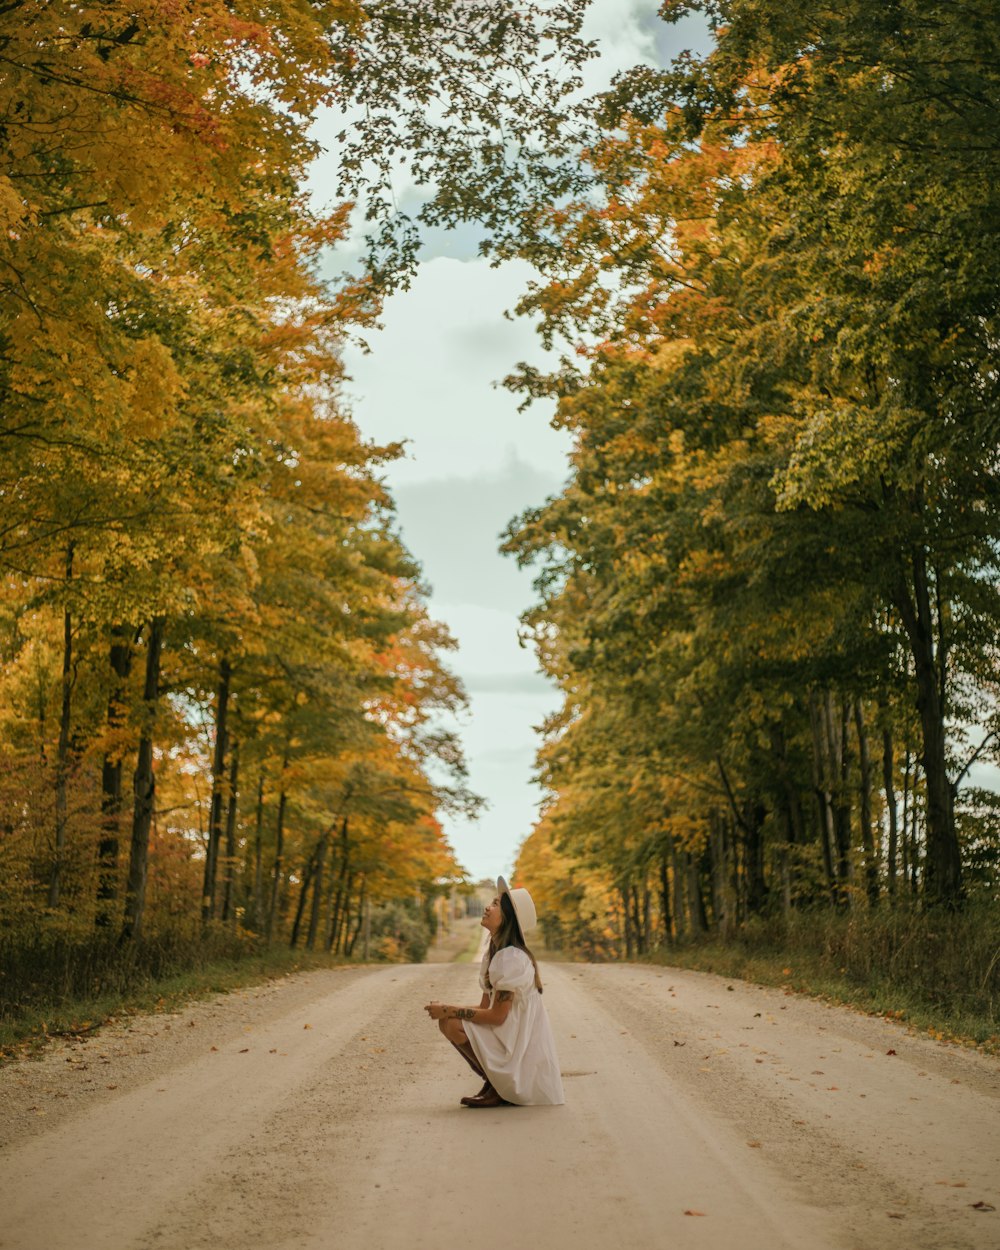 a woman sitting on the side of a dirt road